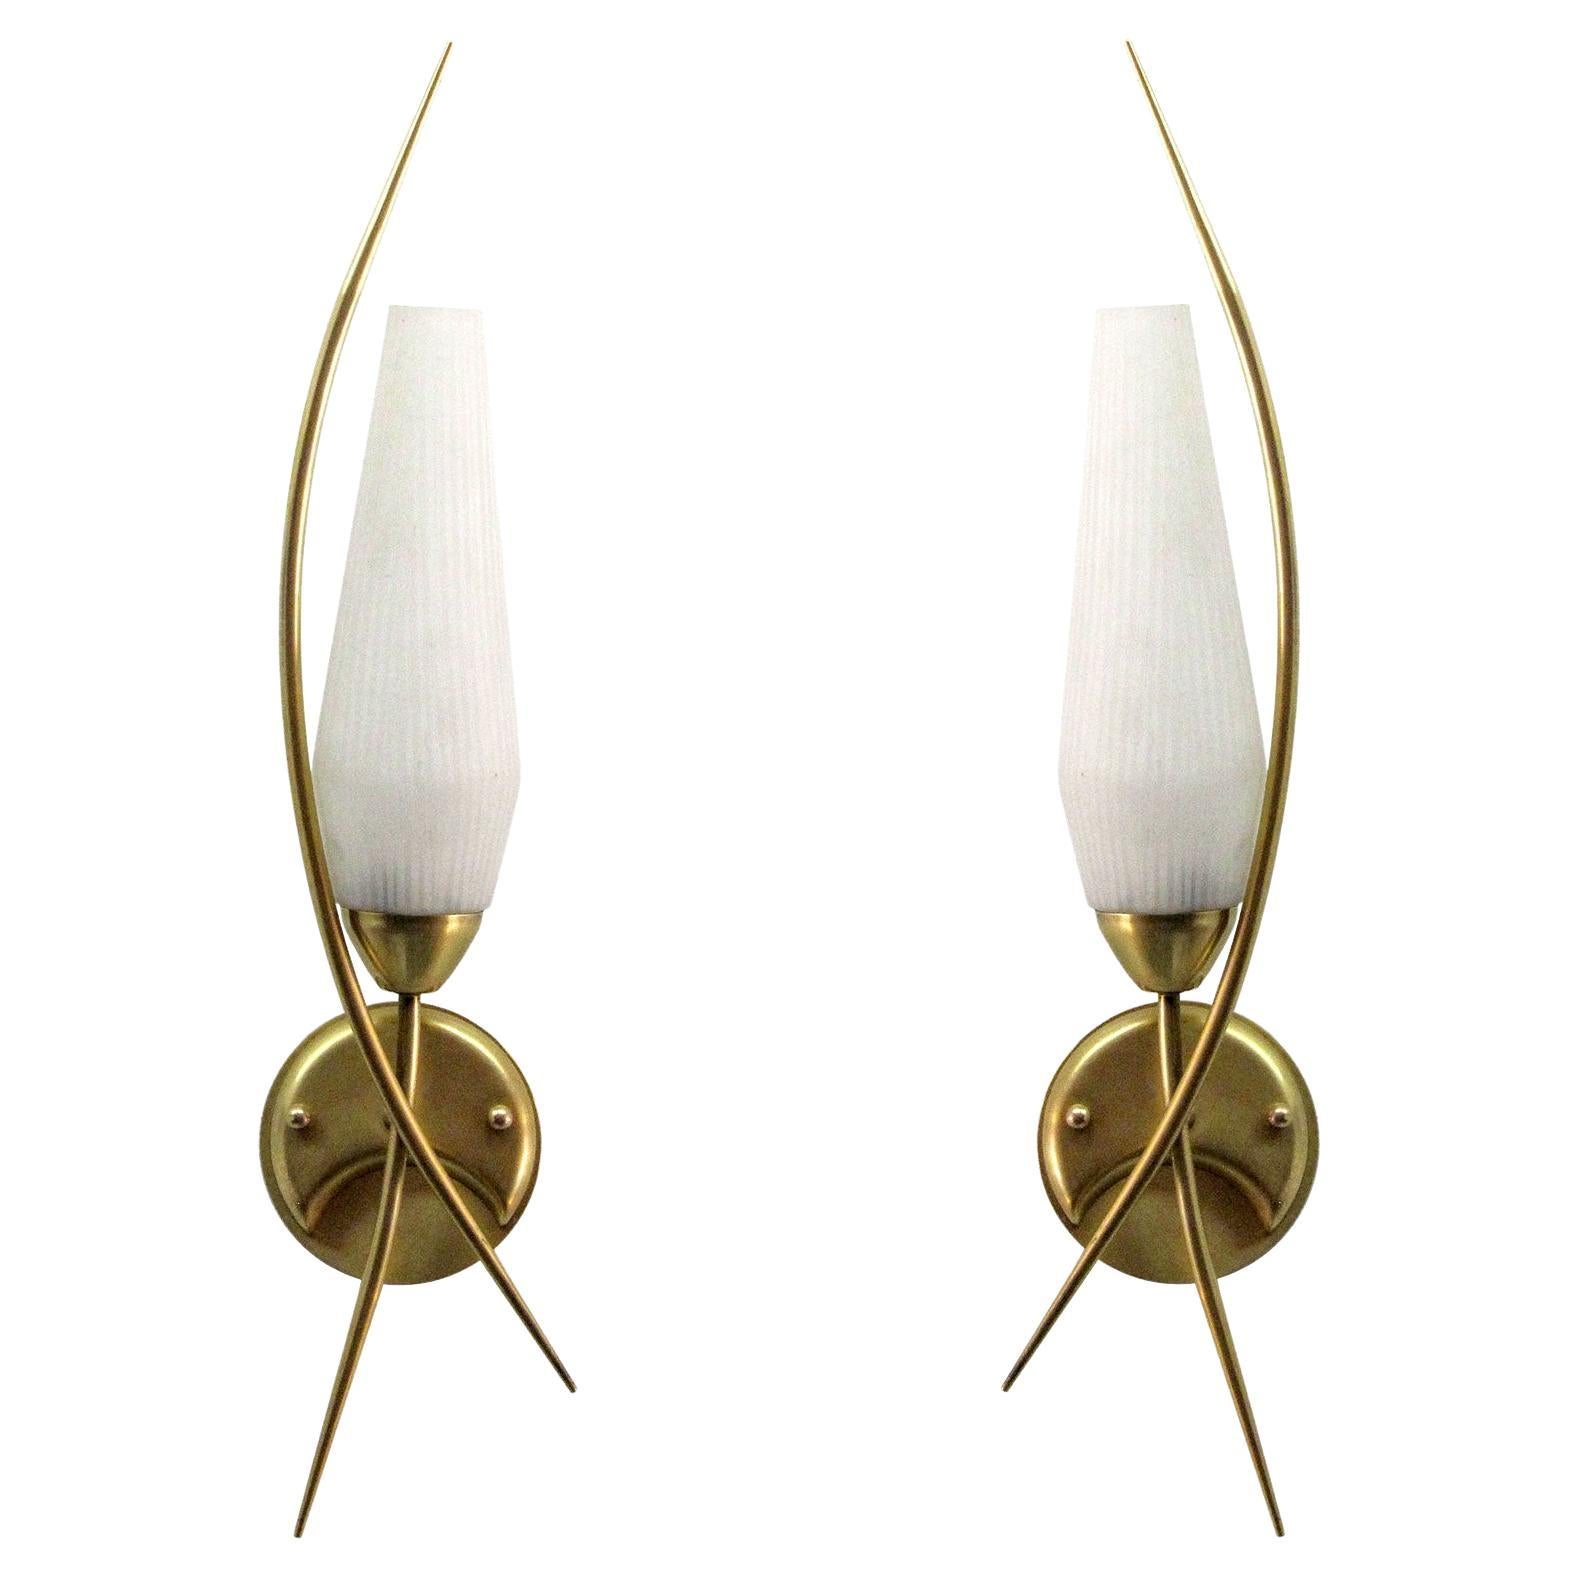 Pair of Lunel Wall Lights, 1950